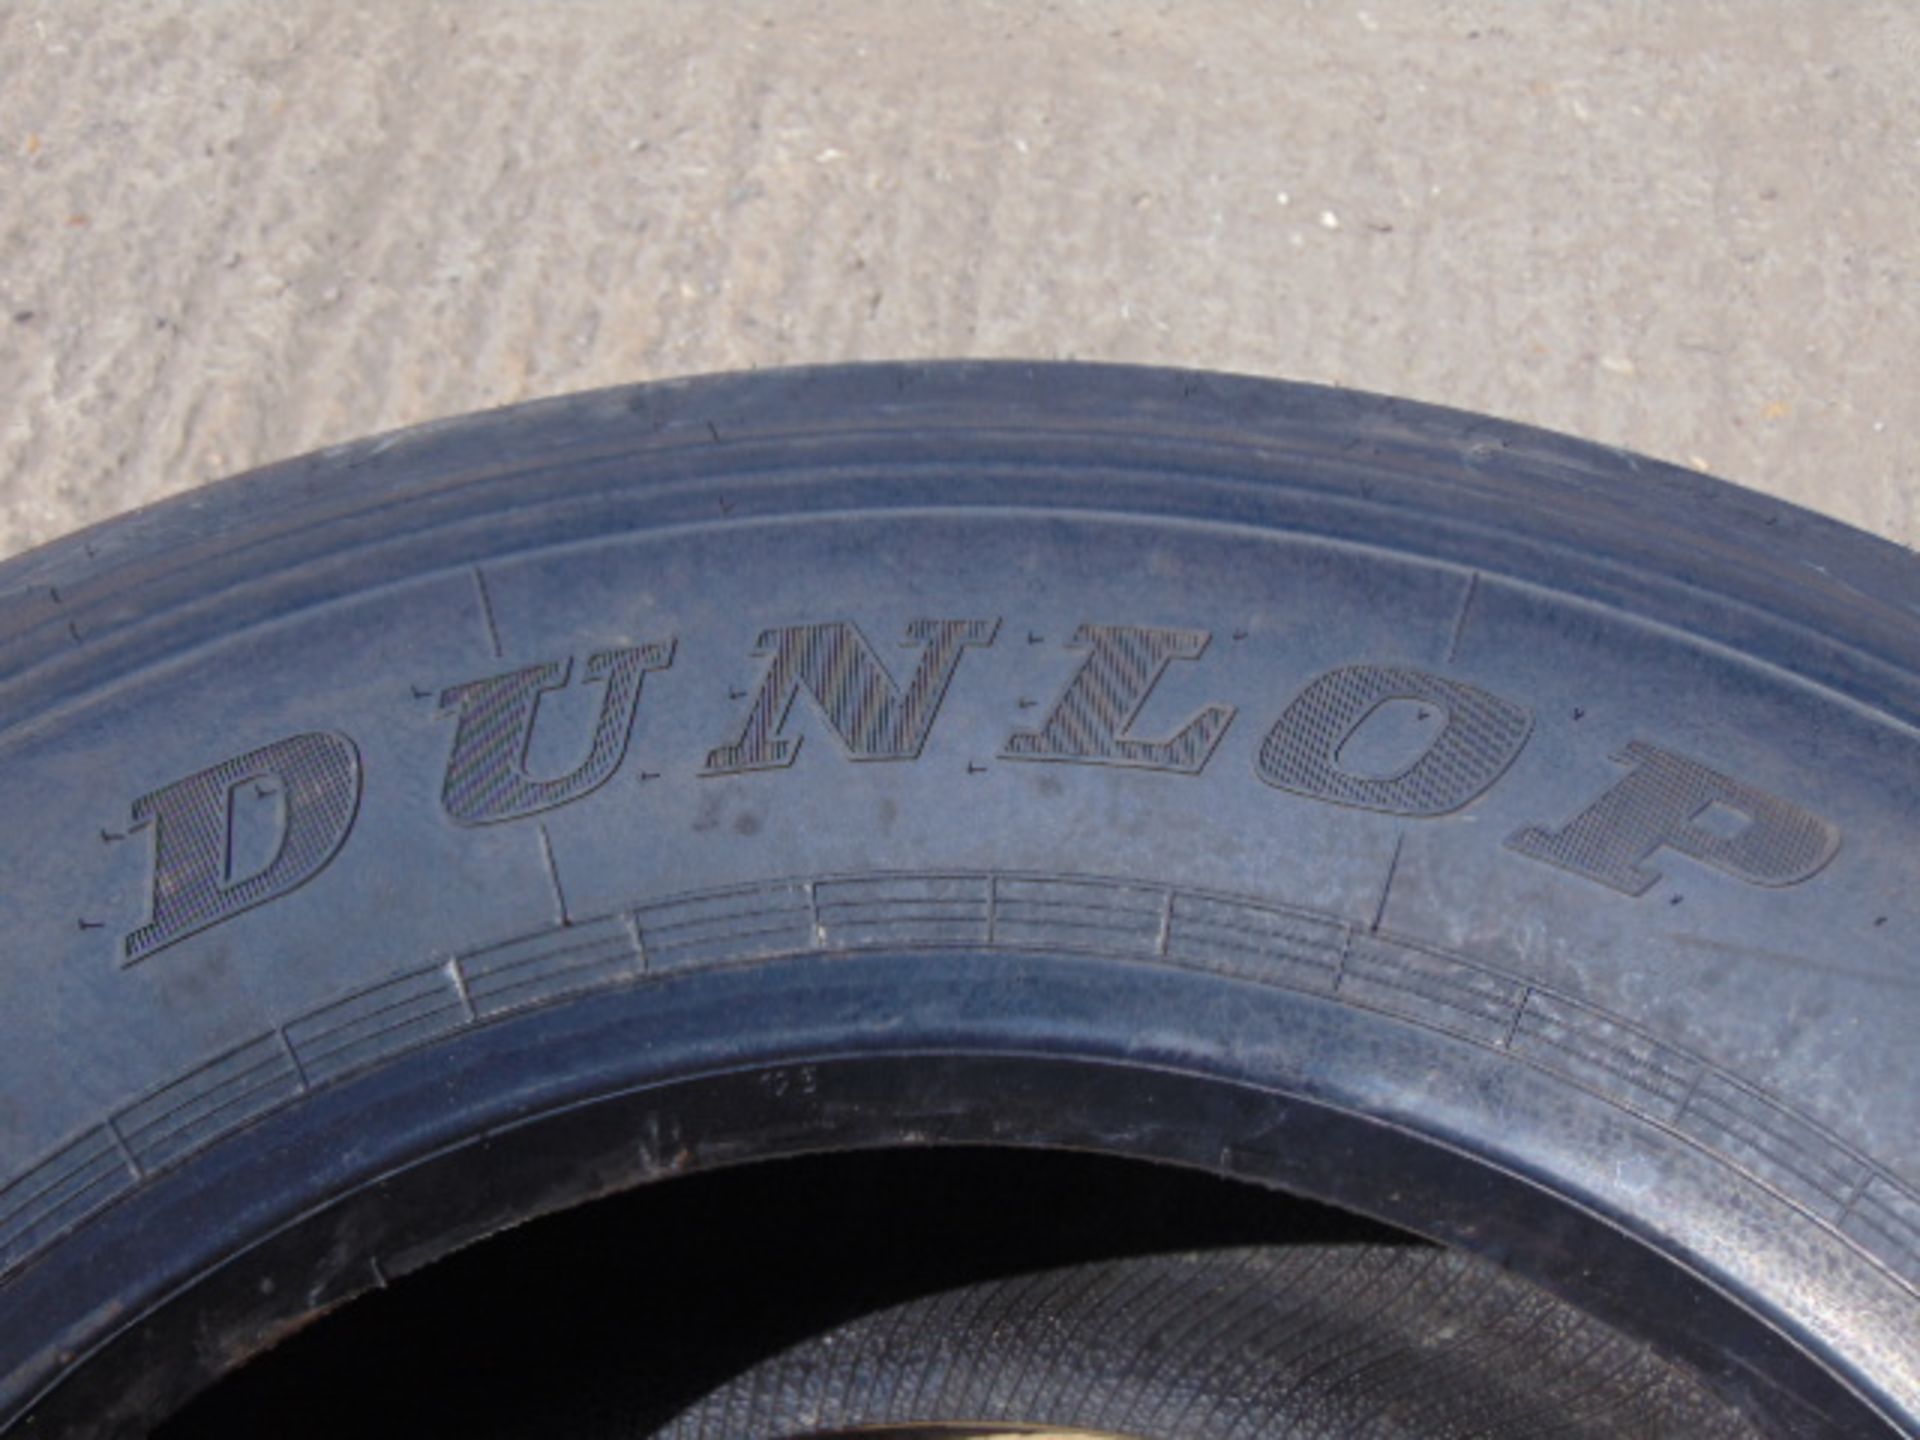 1 x Dunlop SP252 285/70R 19.5 Tyre - Image 4 of 7